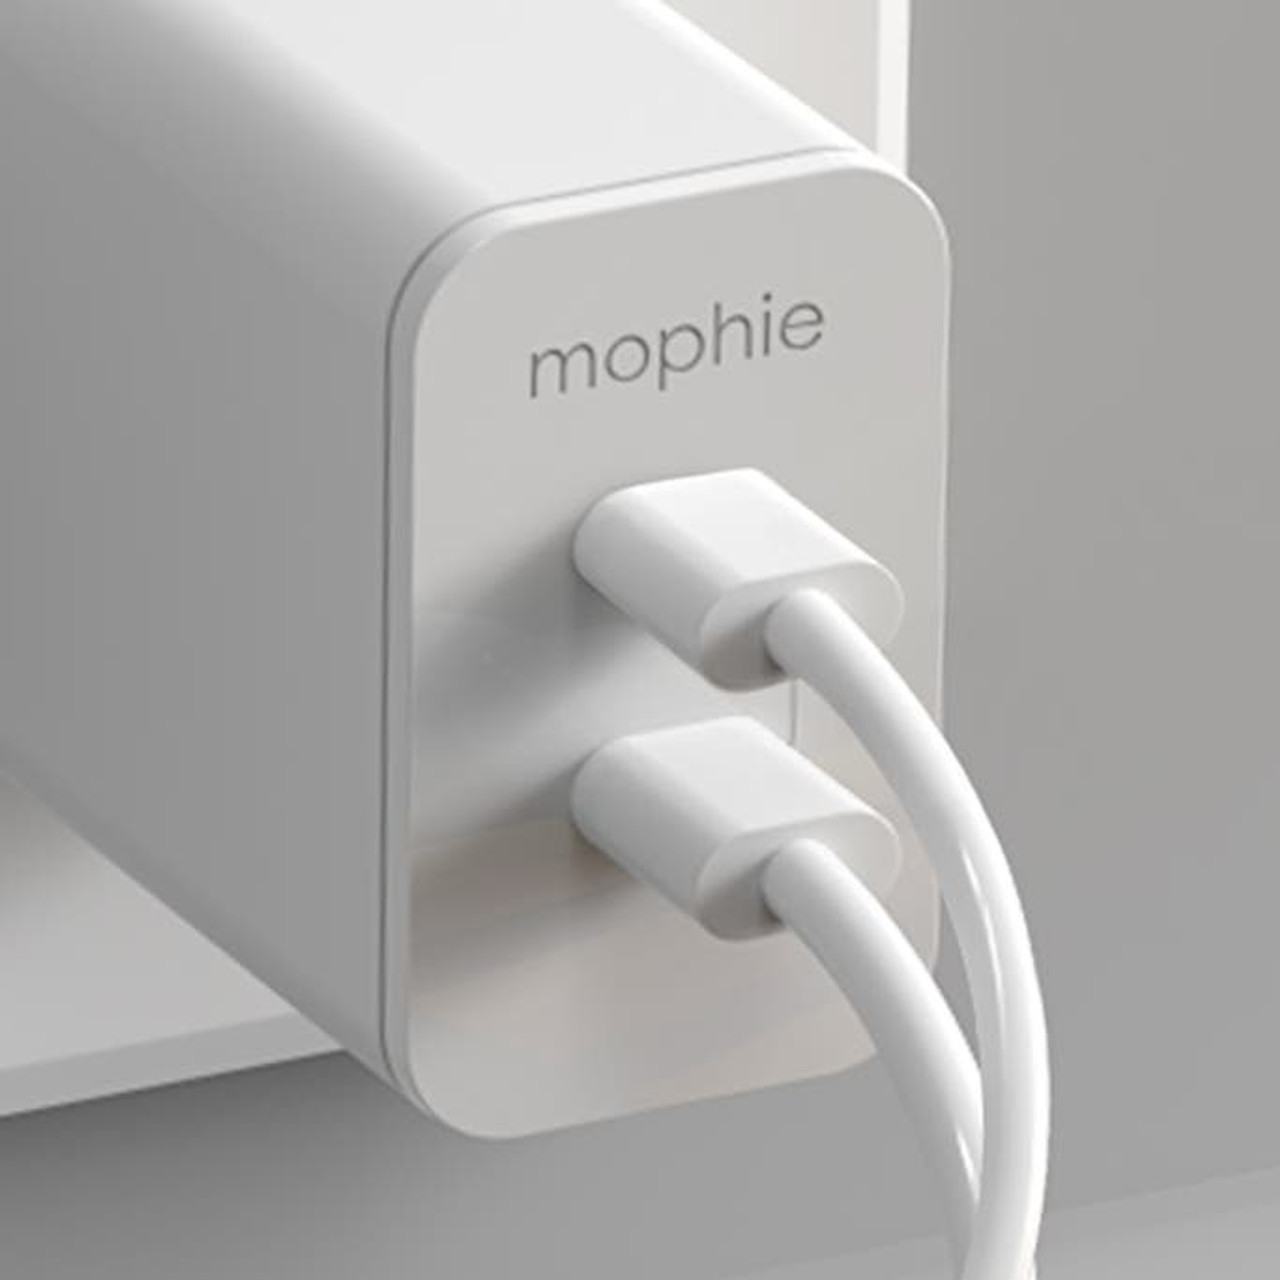 mophie USB-C 20W Car Charger - Apple (UK)